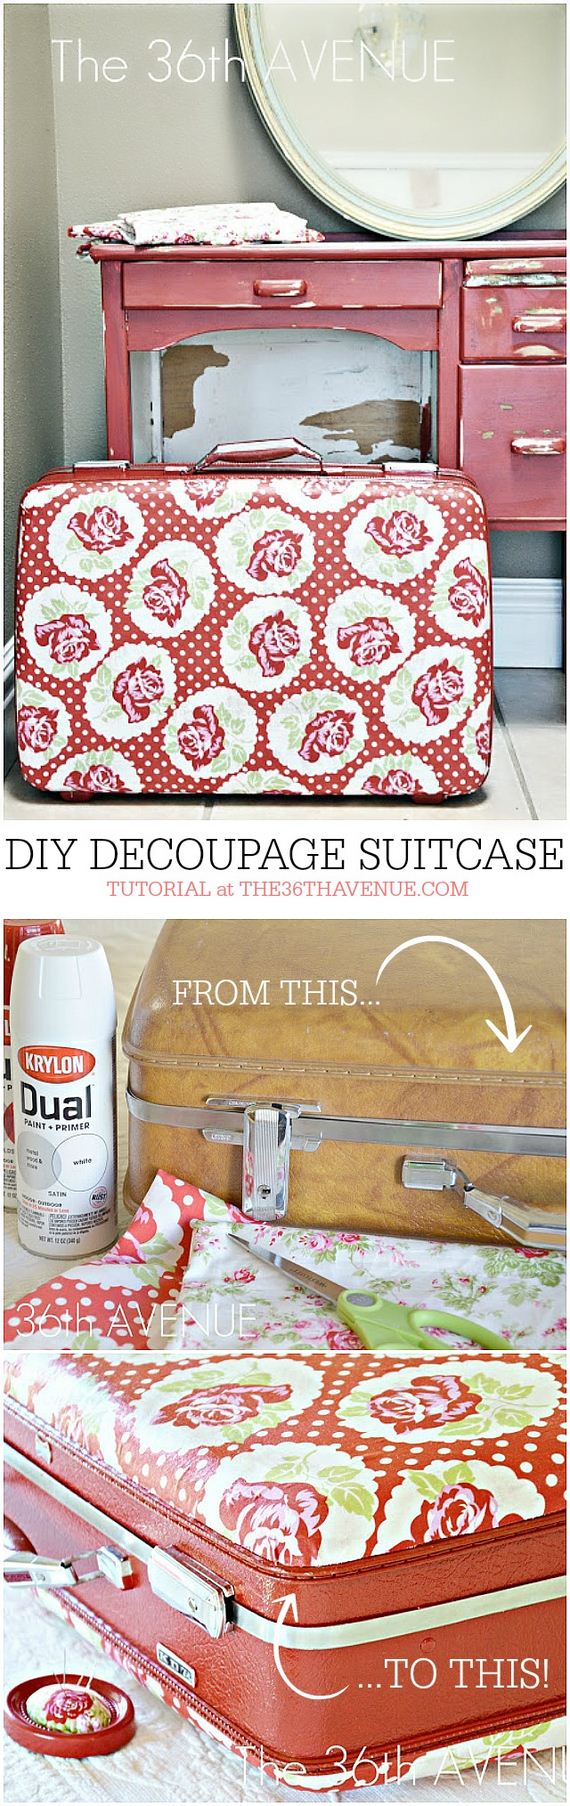 01-Incredible-Ideas-To-Upcycle-An-Old-Suitcase